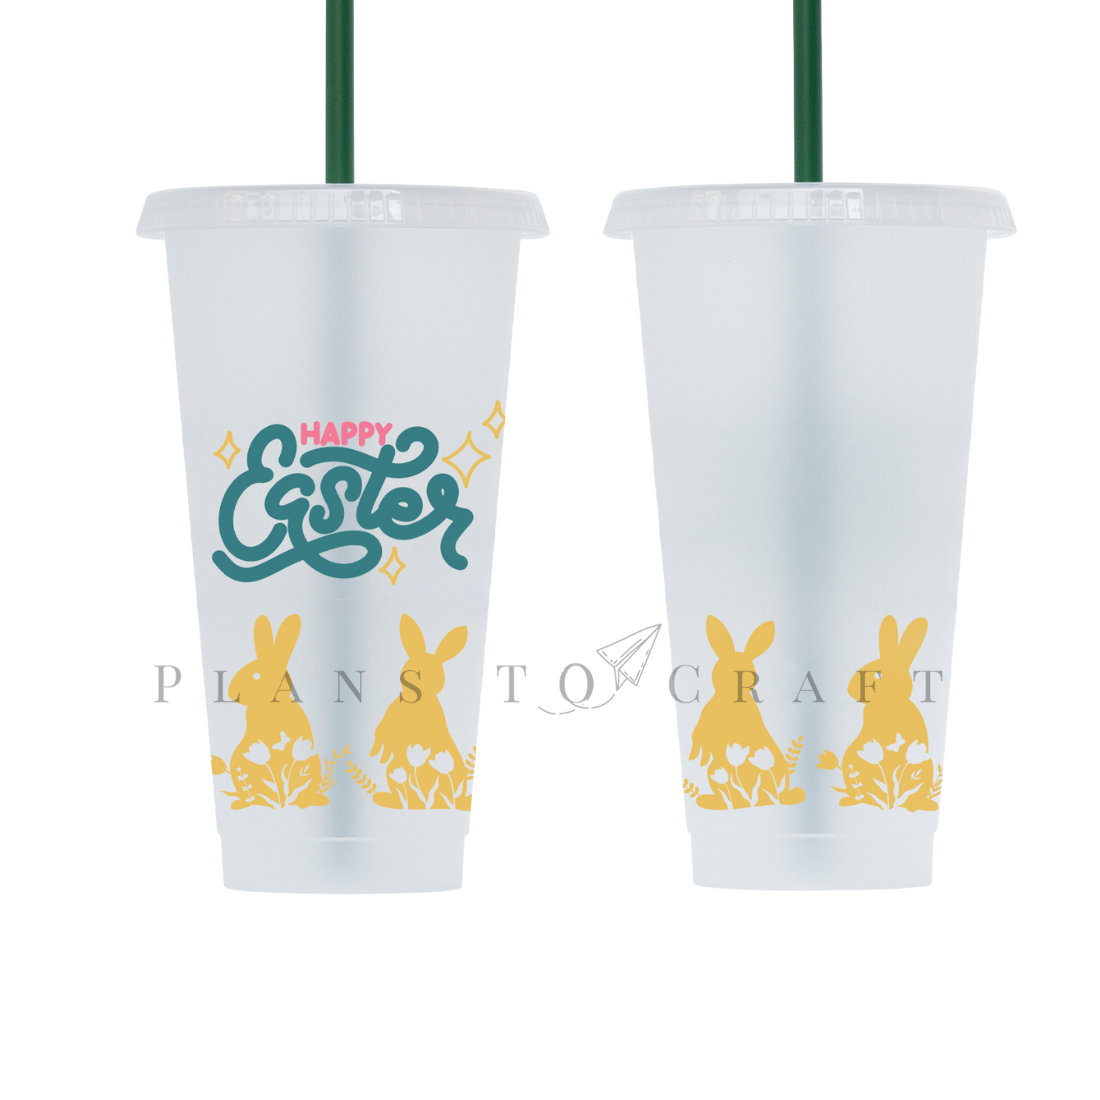 Couple of cups with straws in them.